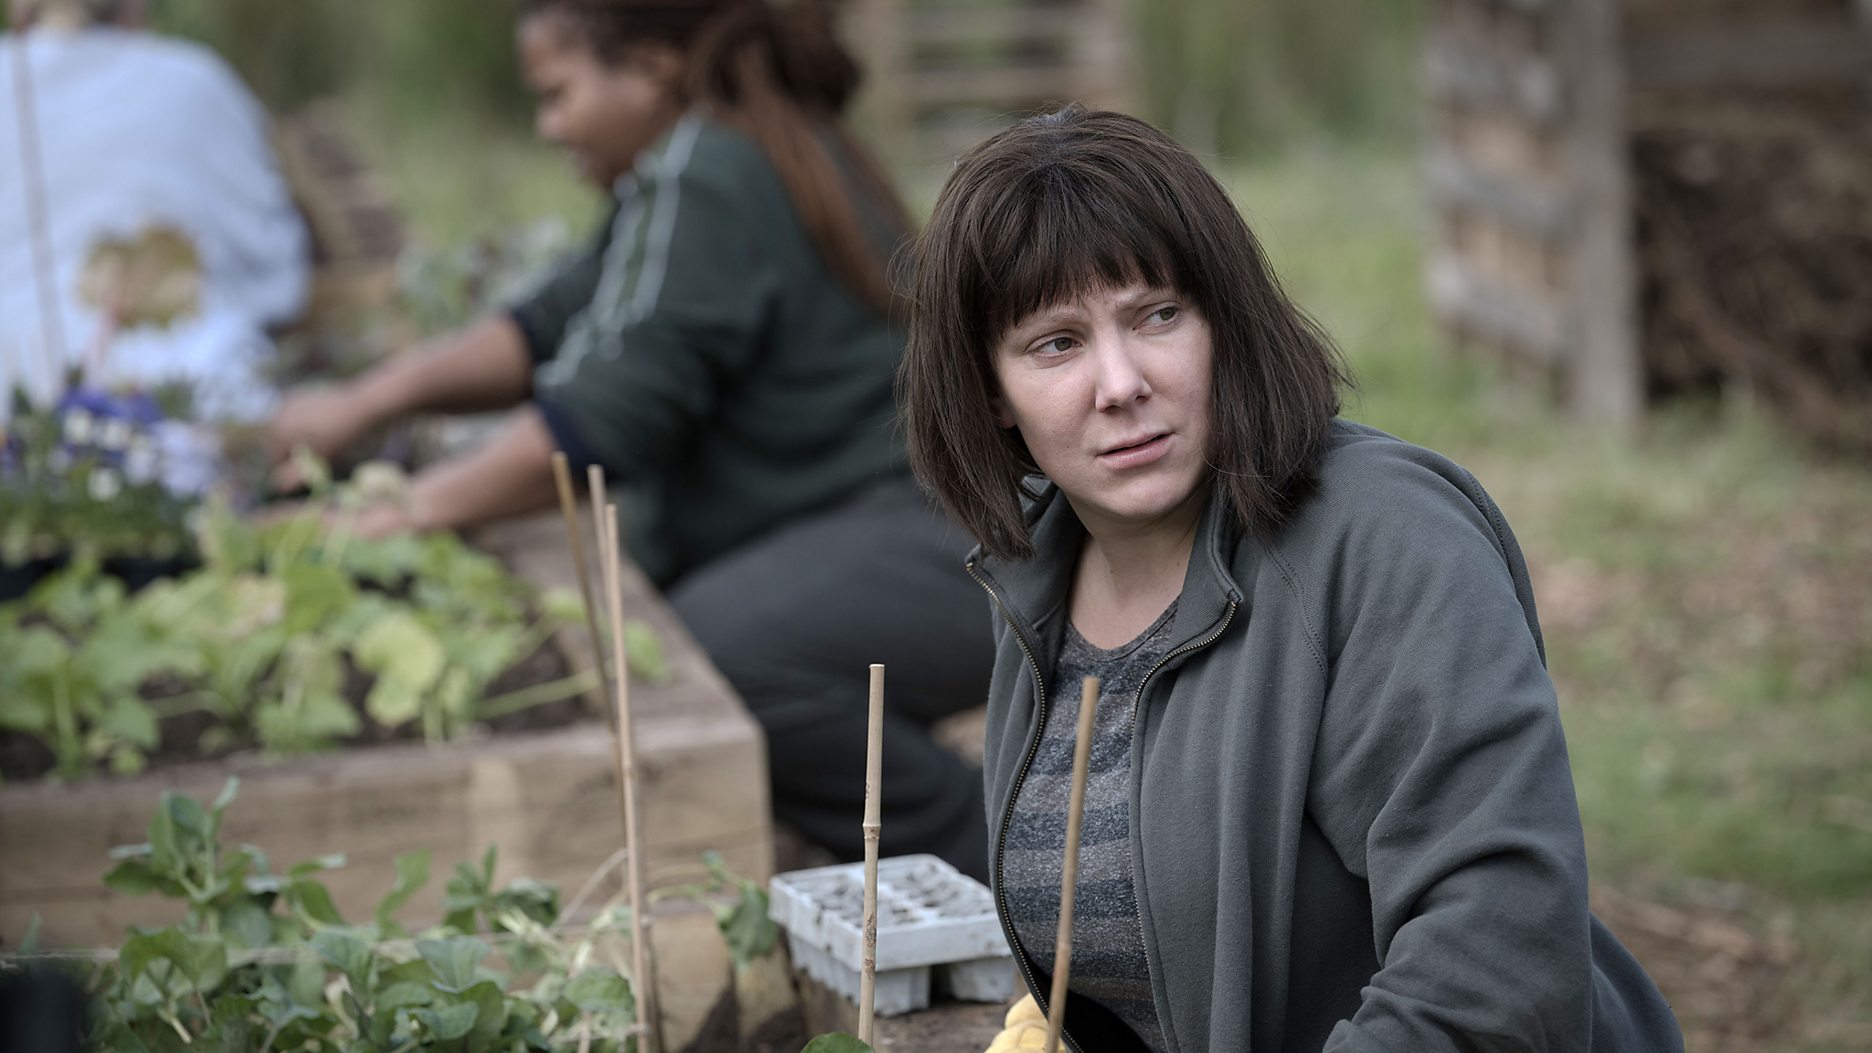 Sophie Willan as Maeve Riley working in the prison gardens in 'Time' Season 2